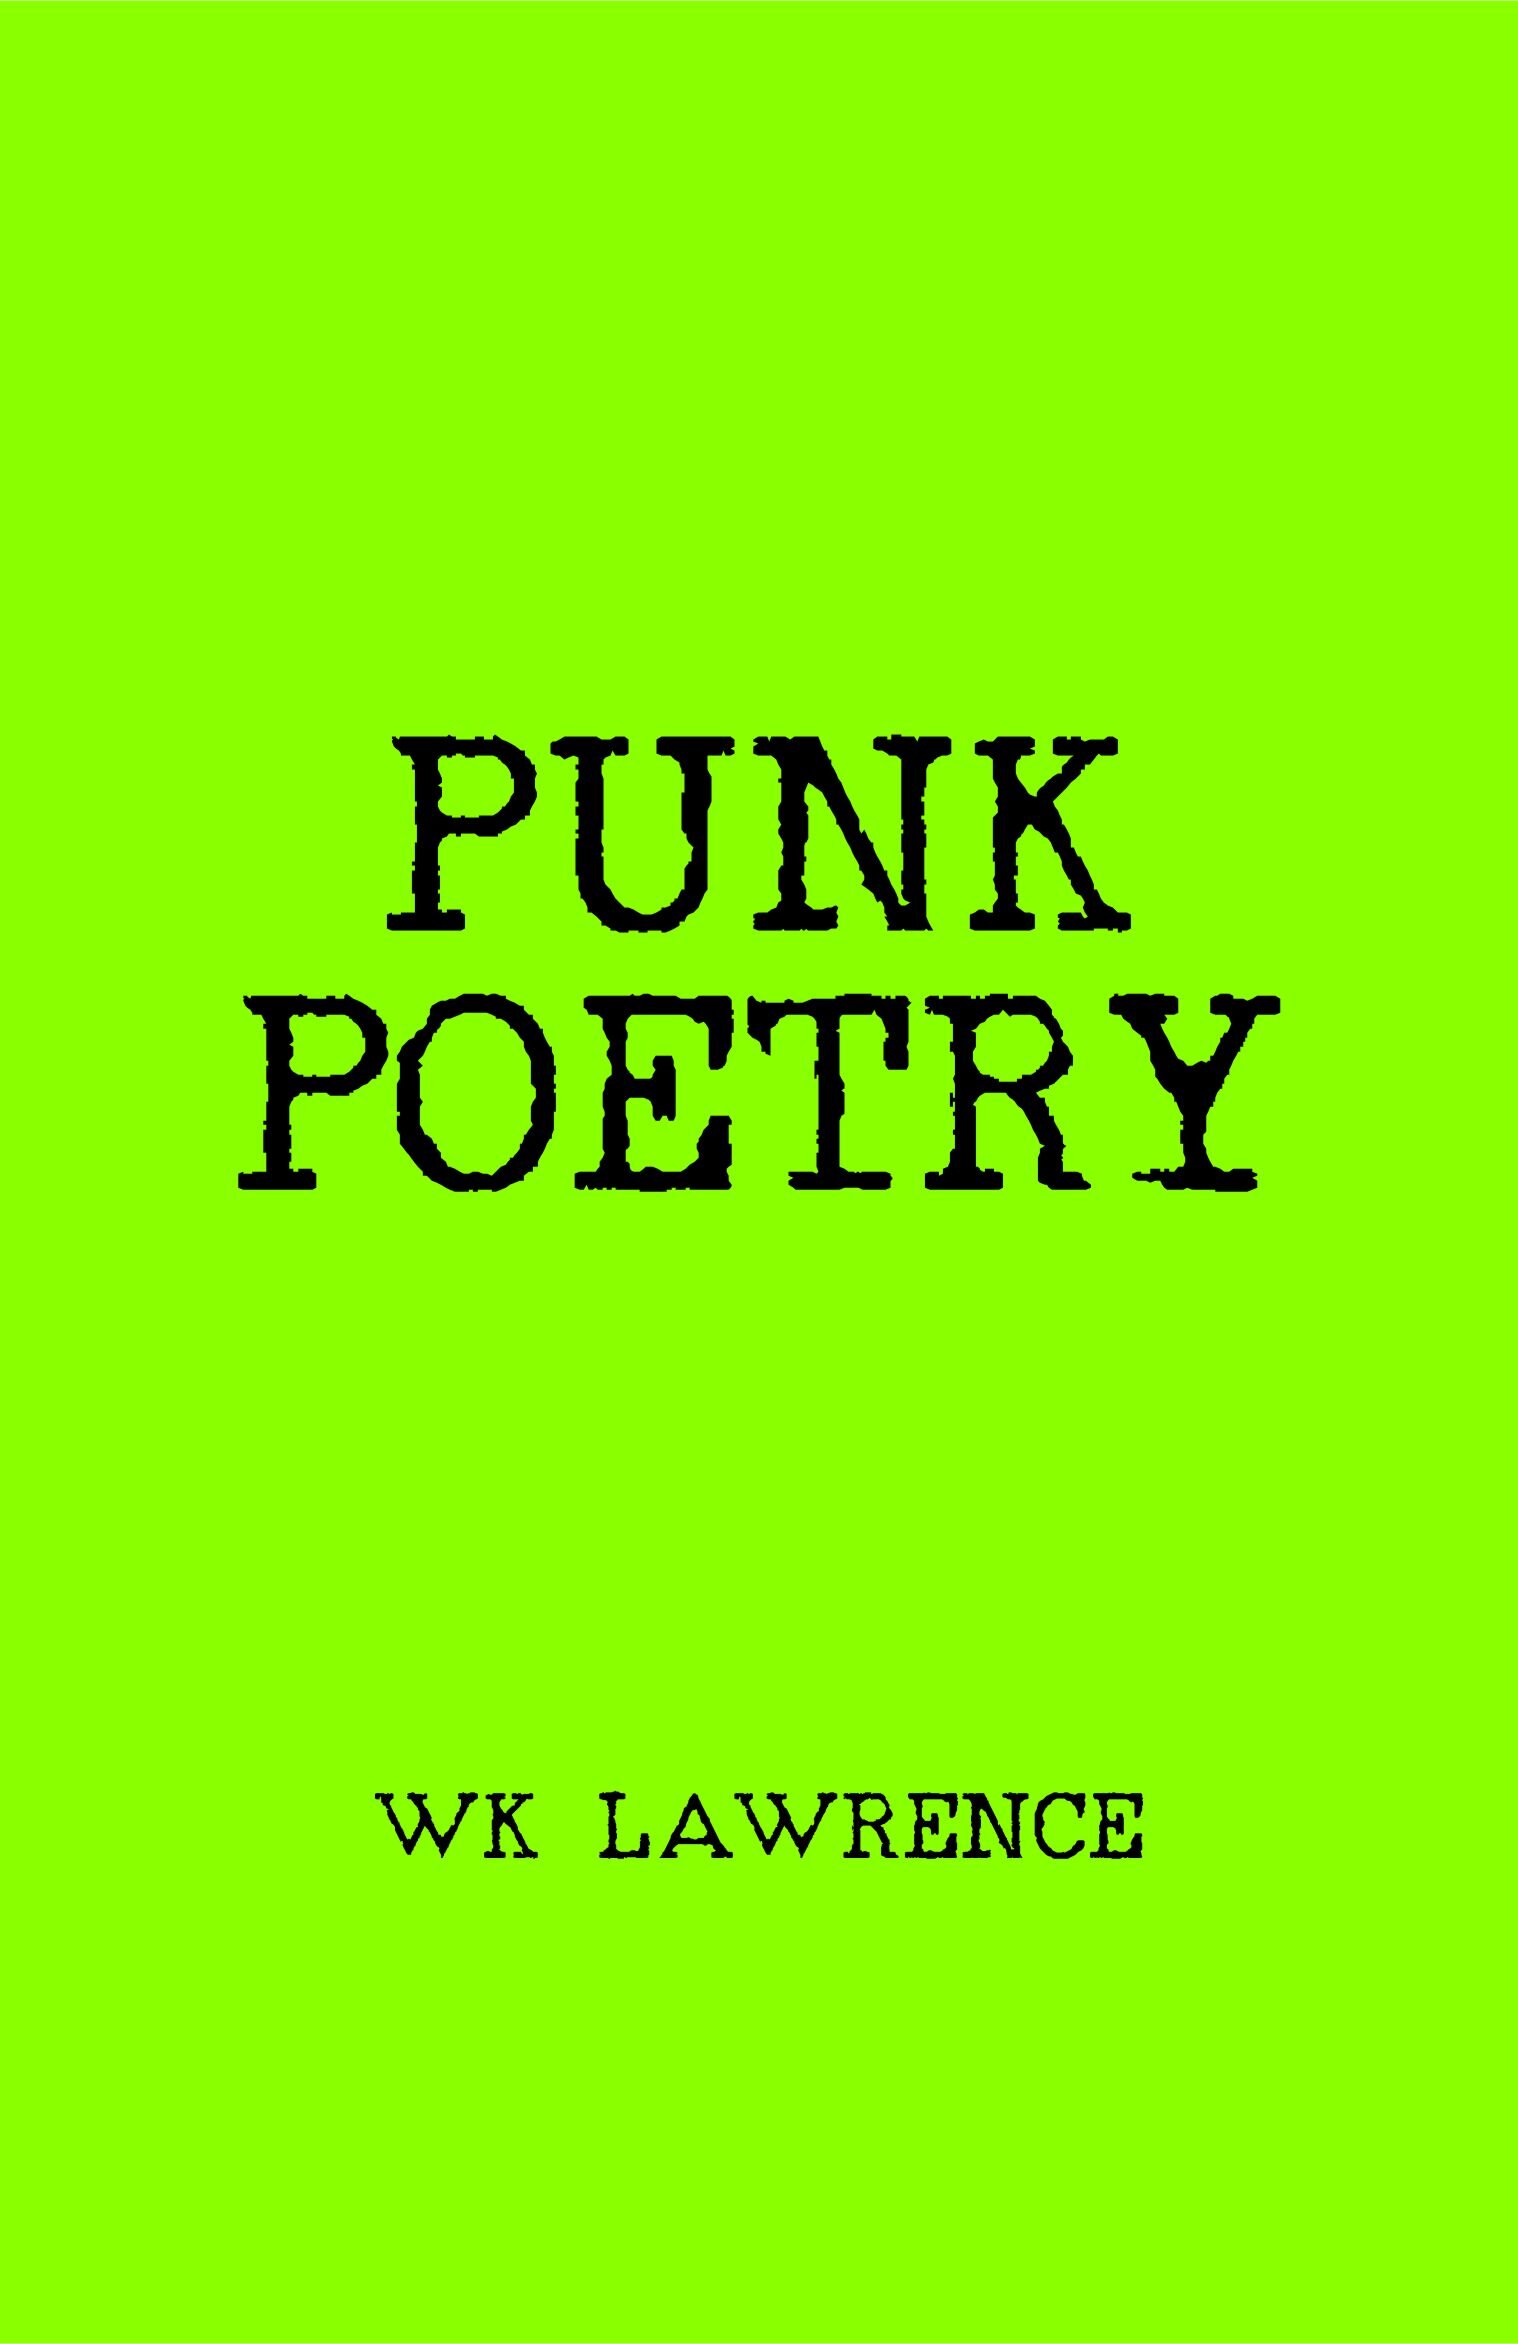 Punk Poetry, 2016, poetry collection 